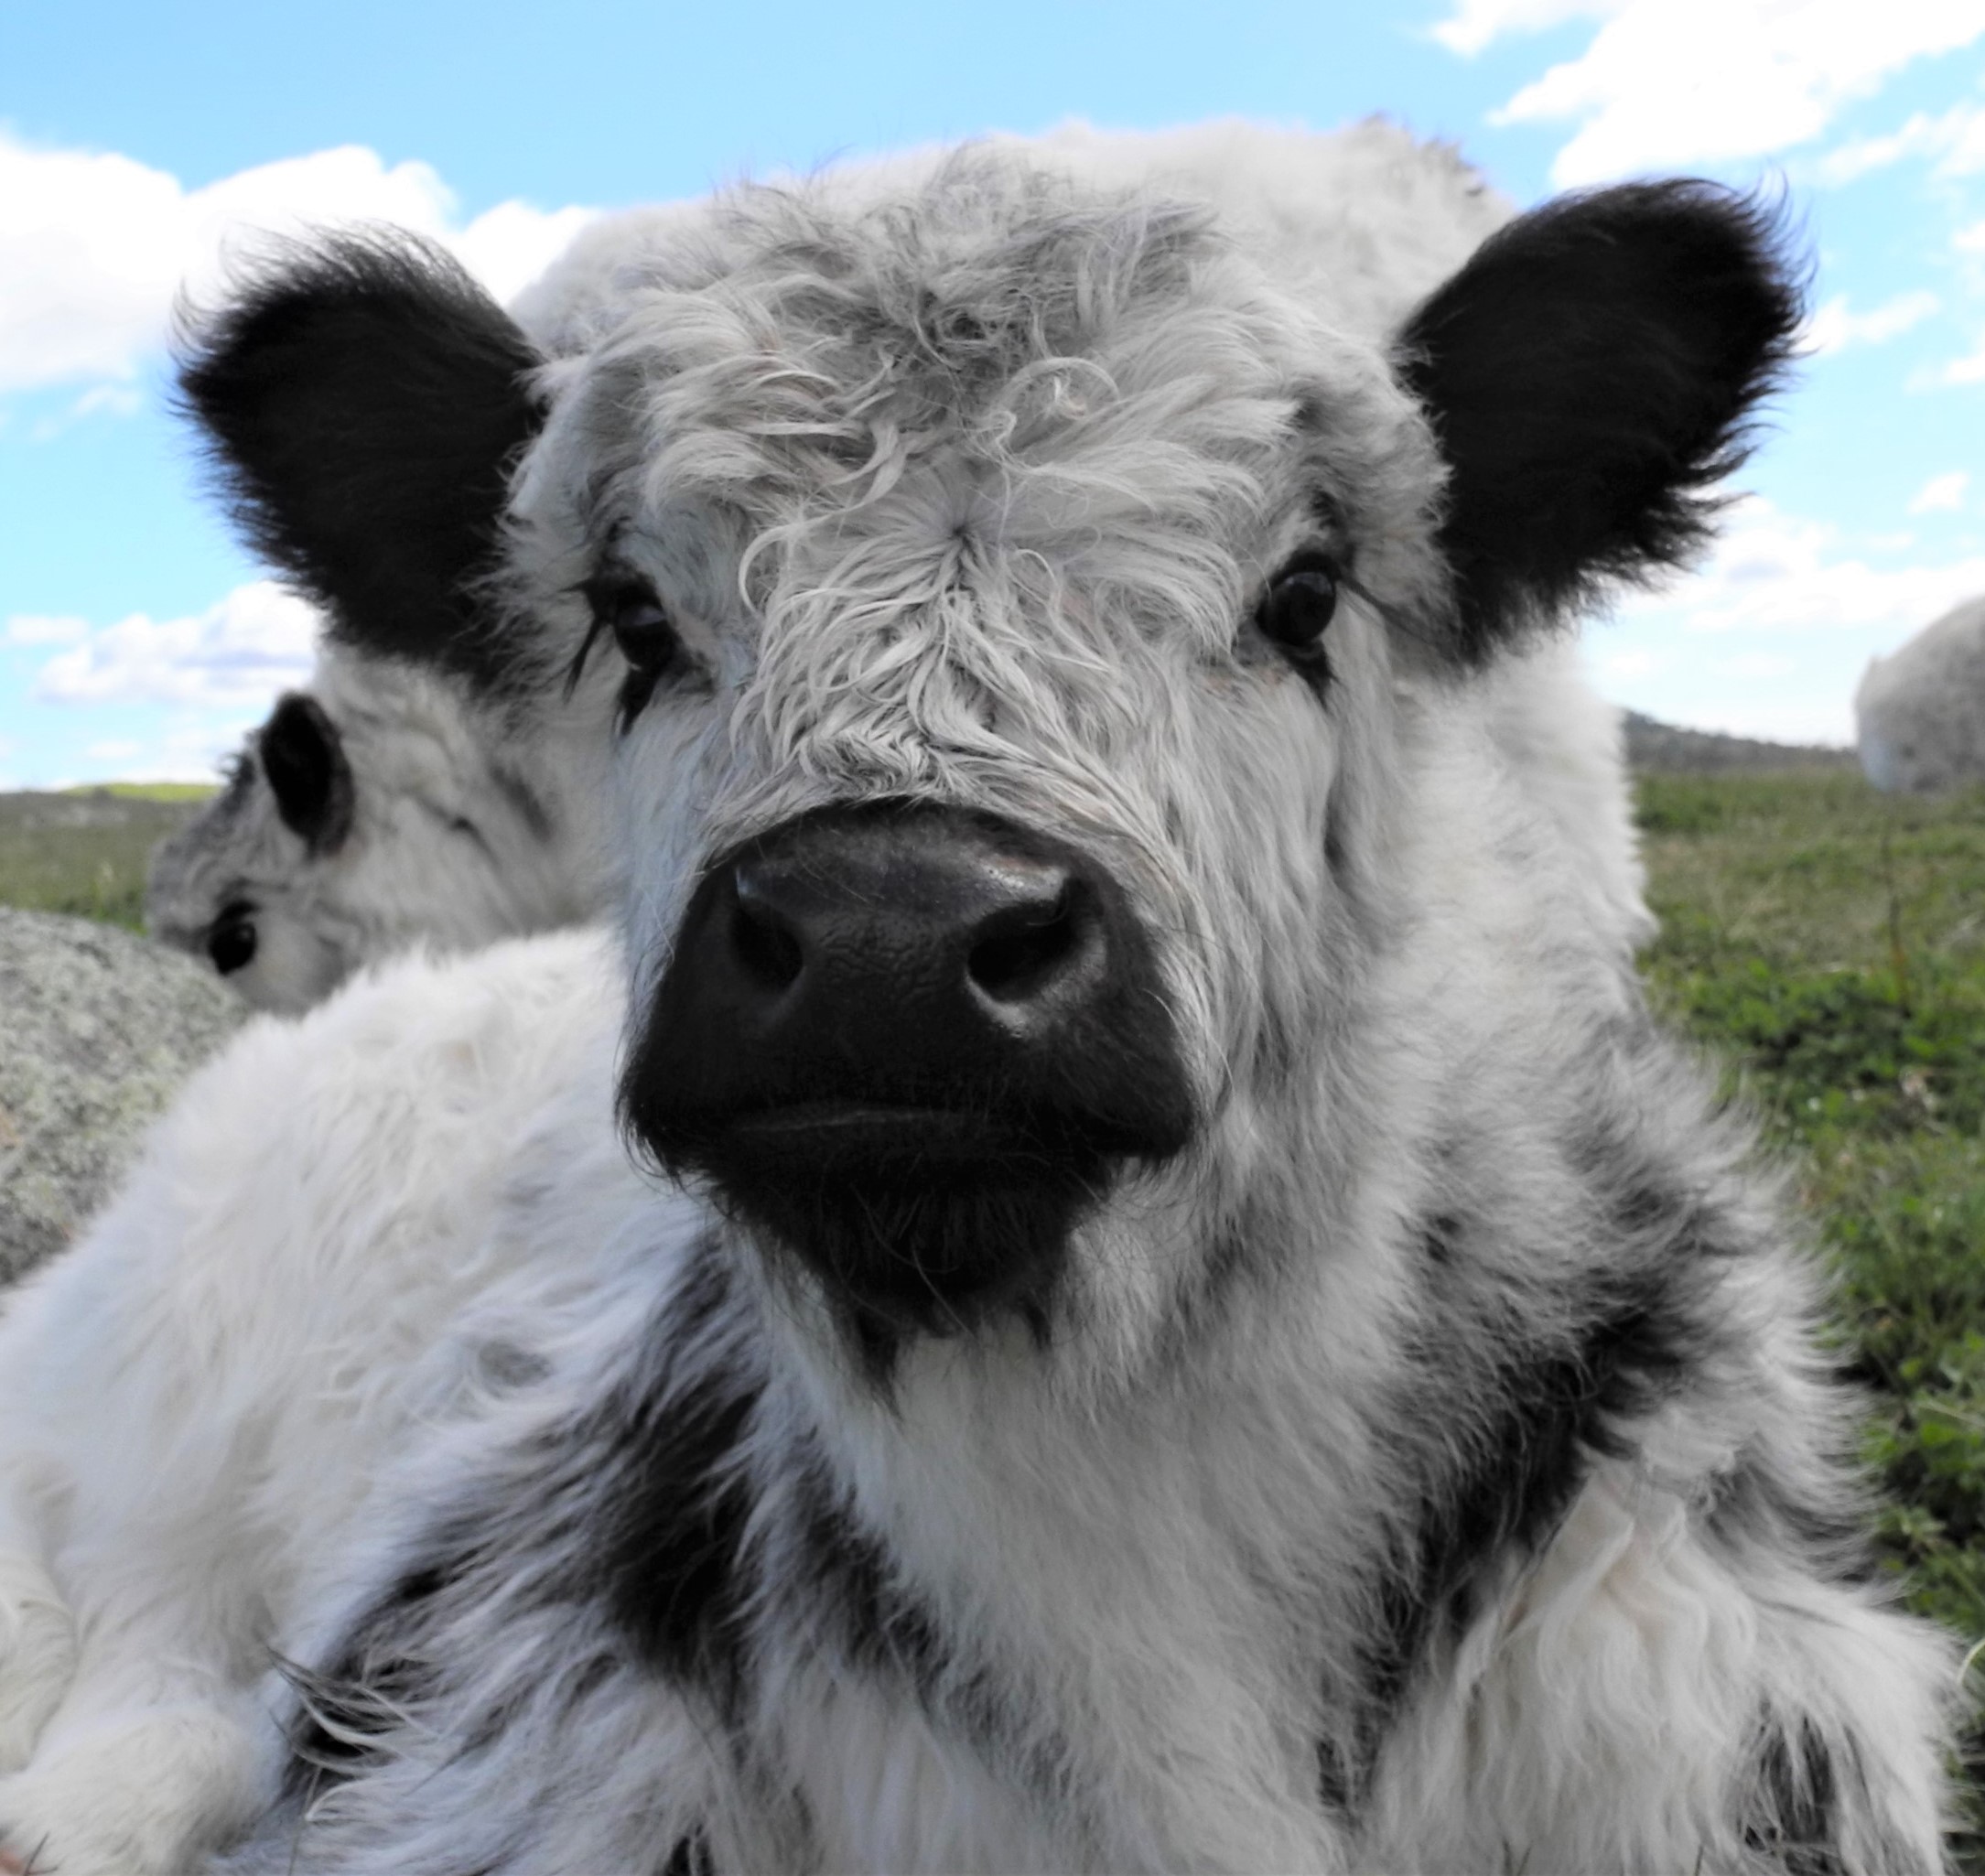 Rare breed rumours  Fluffy cows, Miniature cows, Cute baby cow